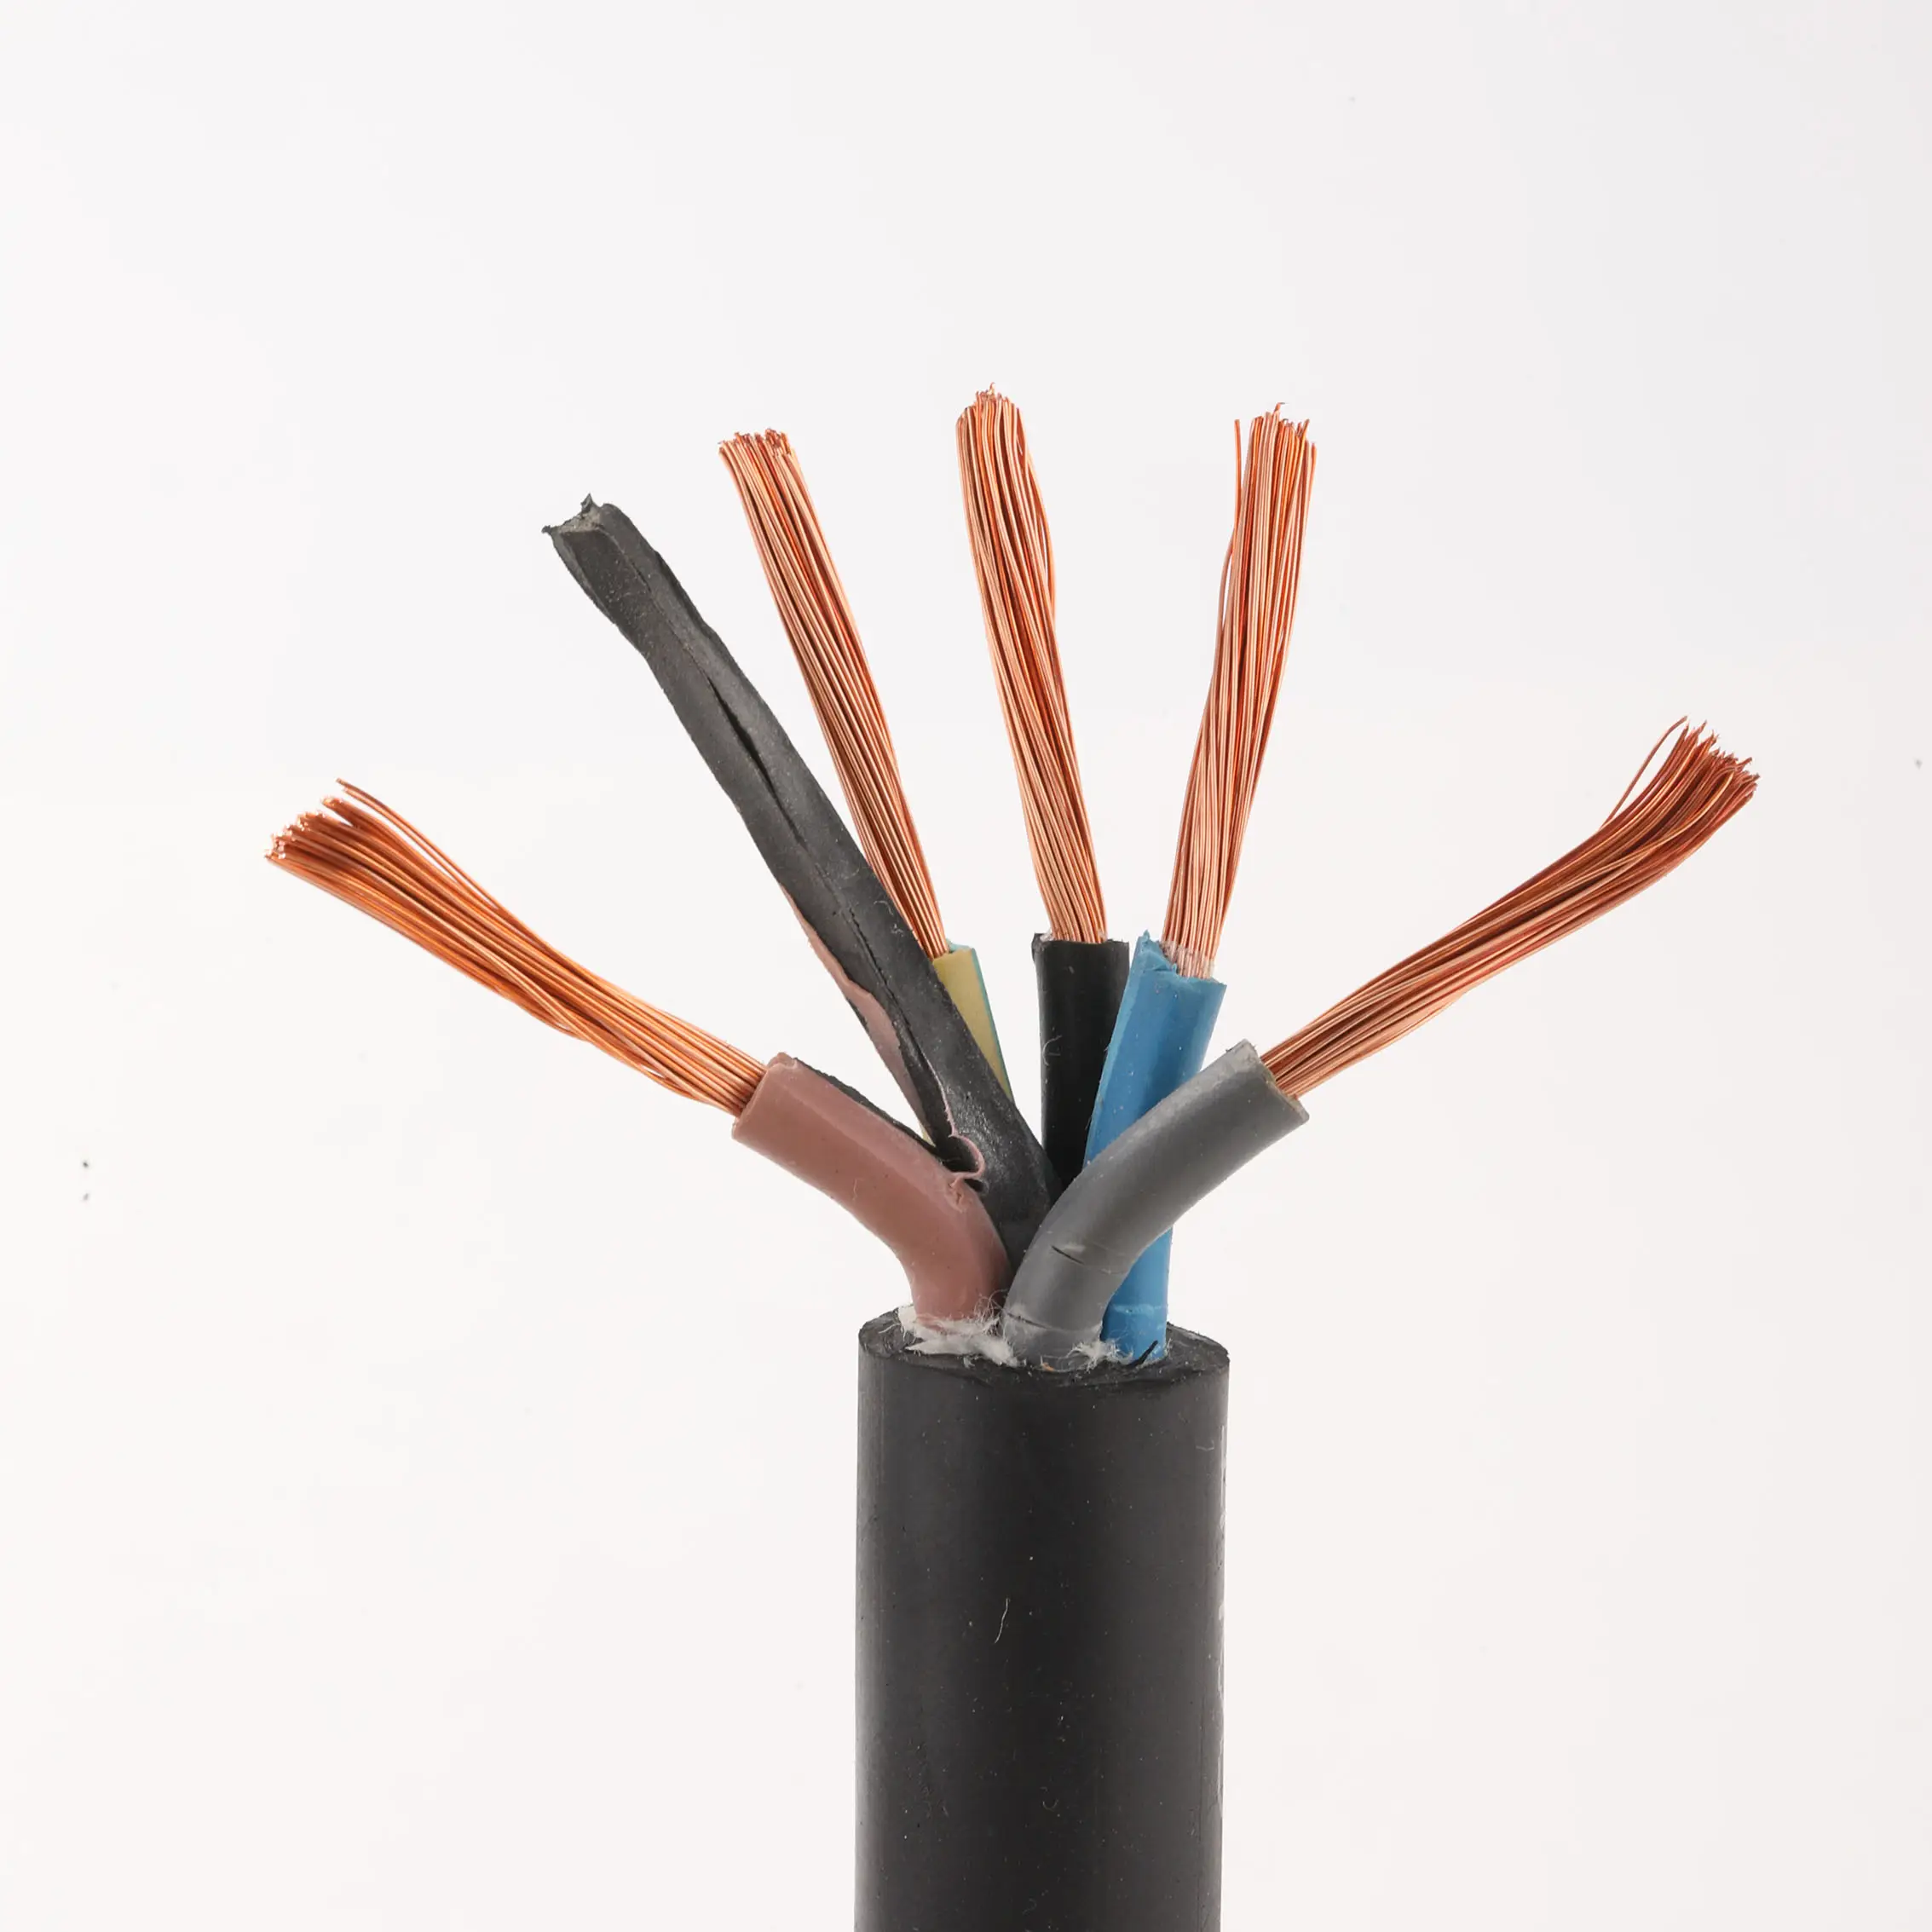 Electric Flexible Rubber Power Cables 5x4mm2 5x6mm2 5x10mm2 Copper Wire Various Sizes High Quality